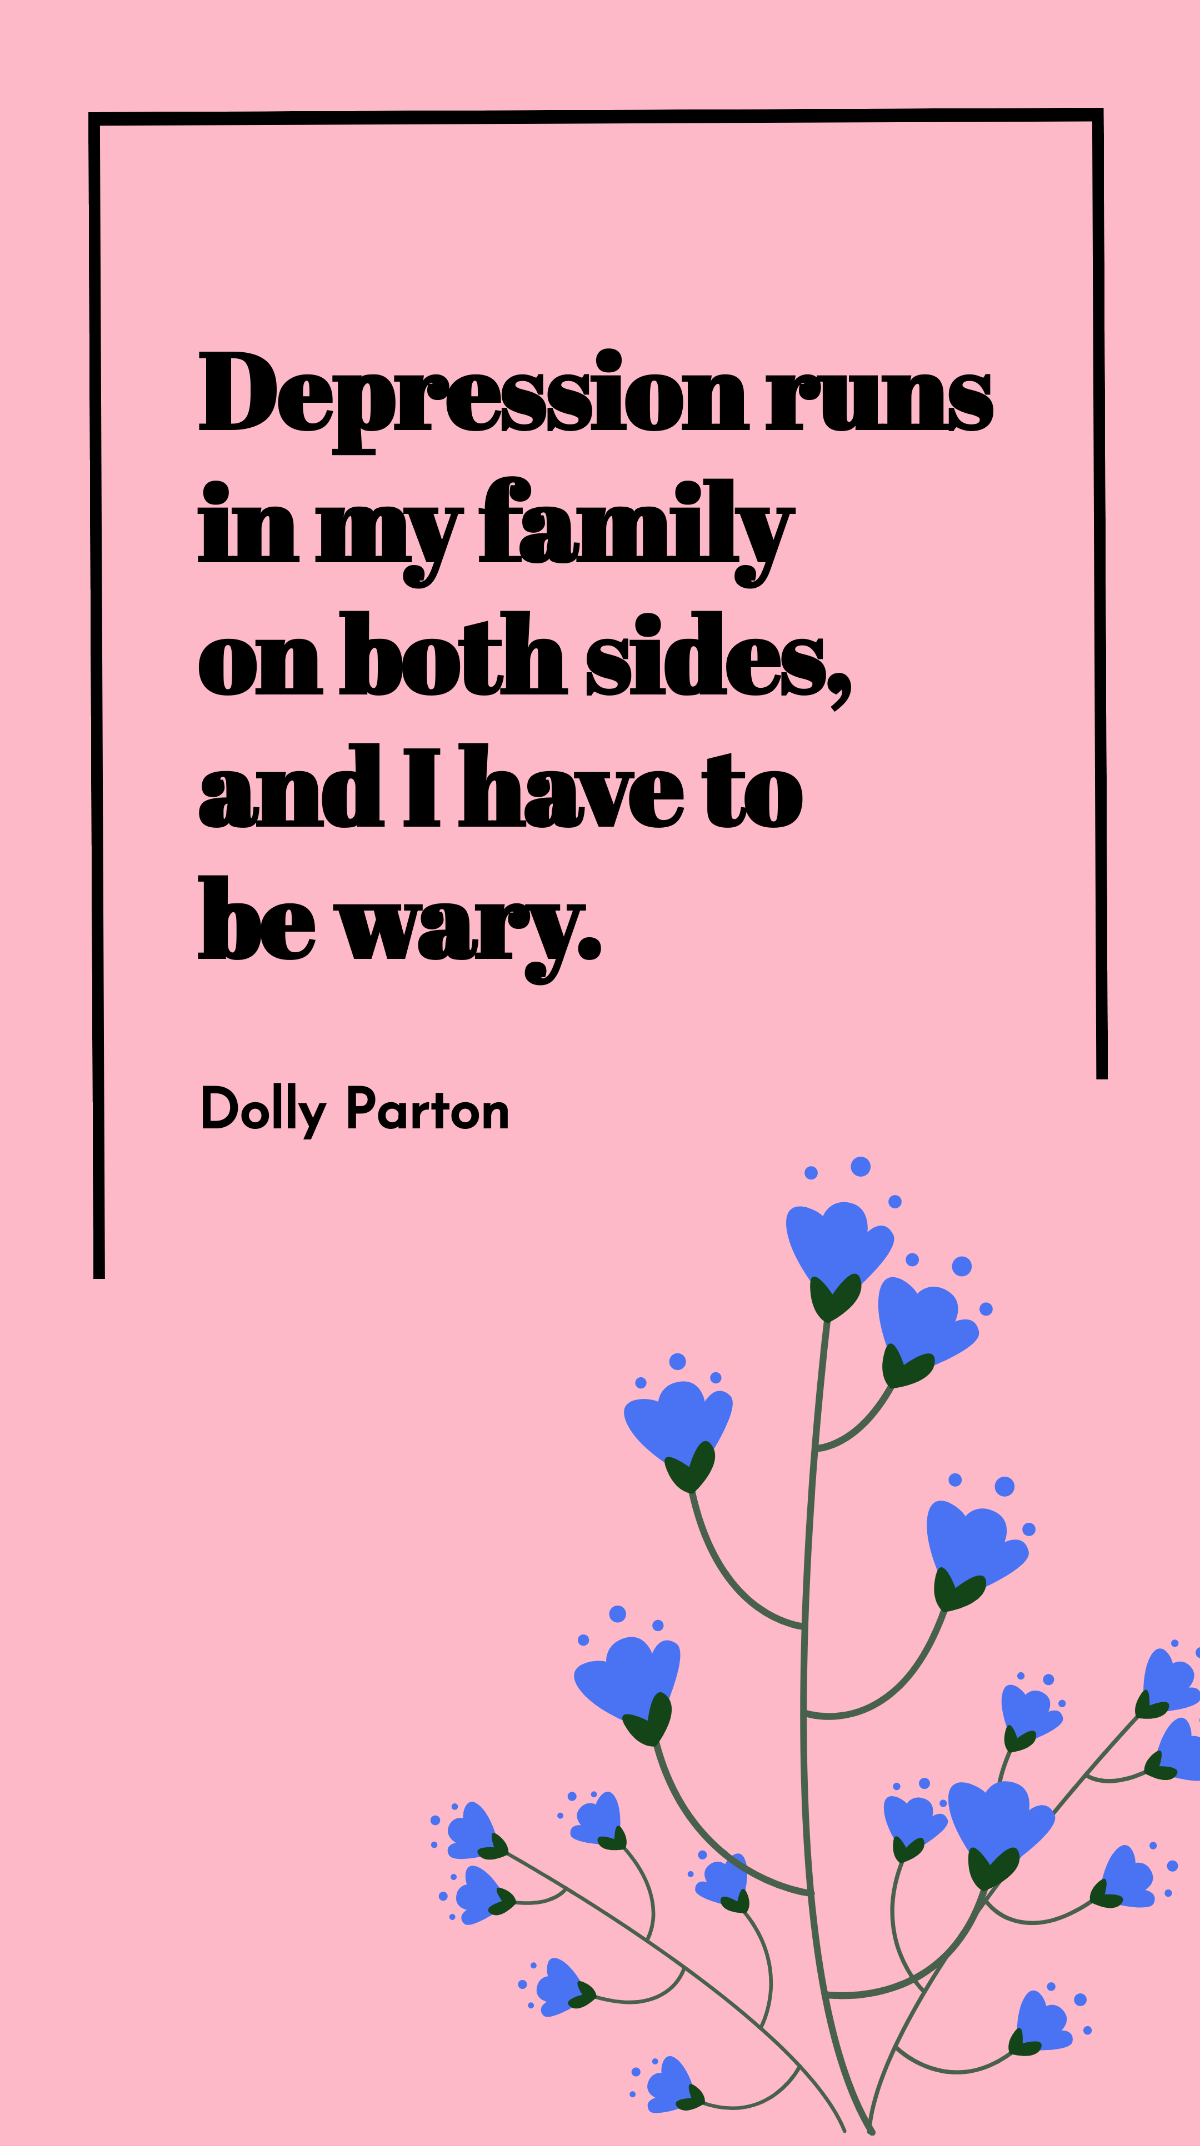 Dolly Parton - Depression runs in my family on both sides, and I have to be wary. Template